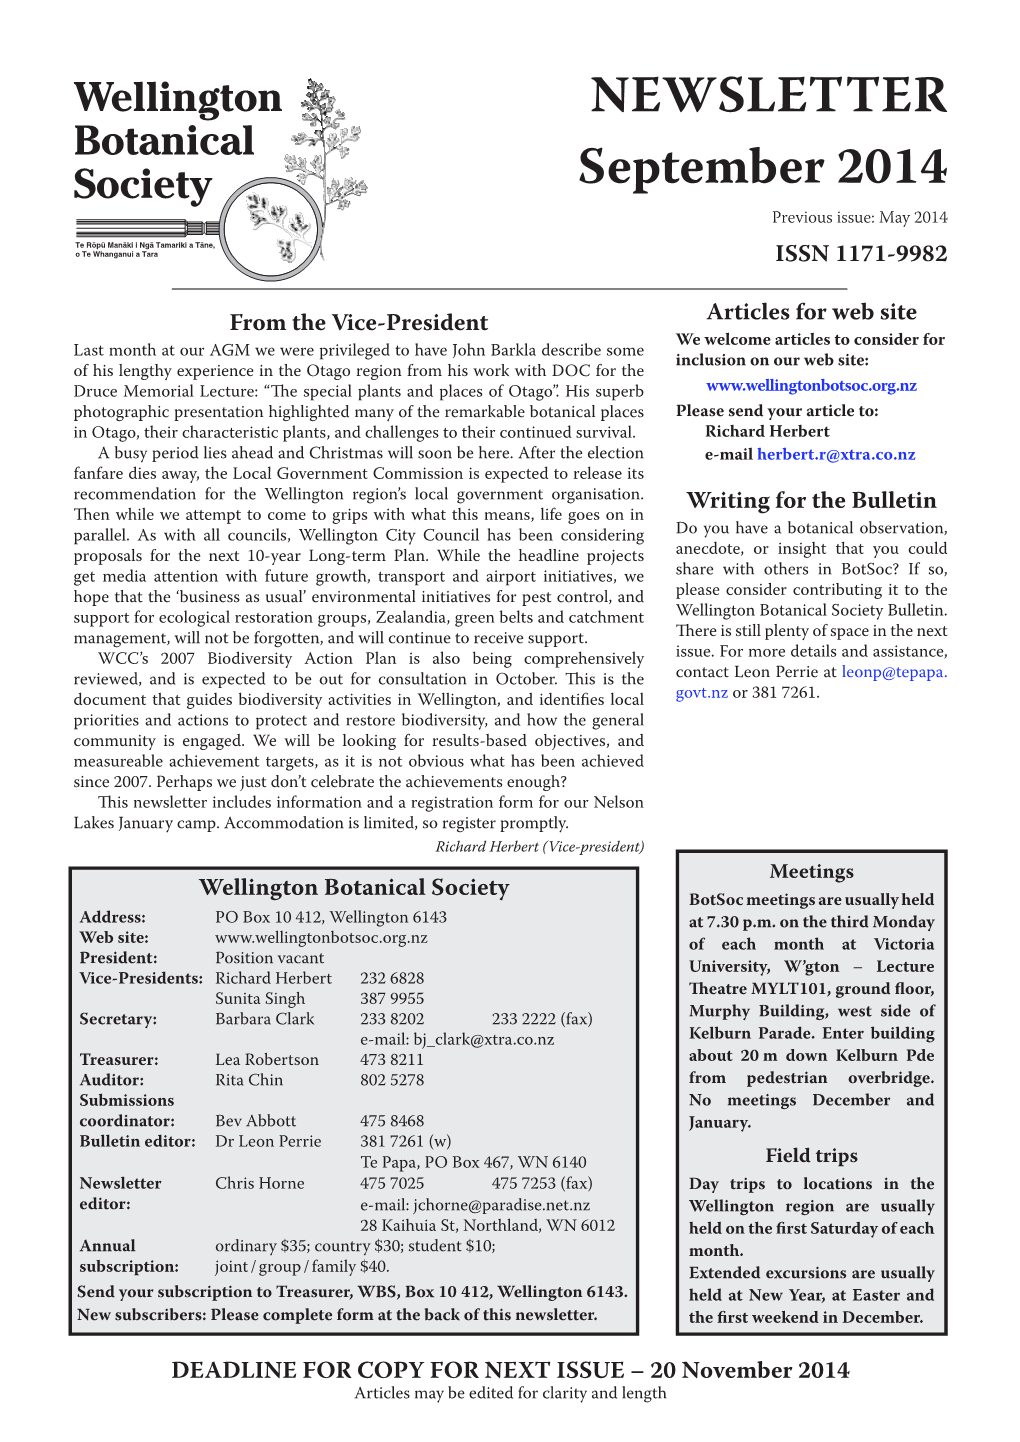 NEWSLETTER September 2014 Previous Issue: May 2014 ISSN 1171-9982